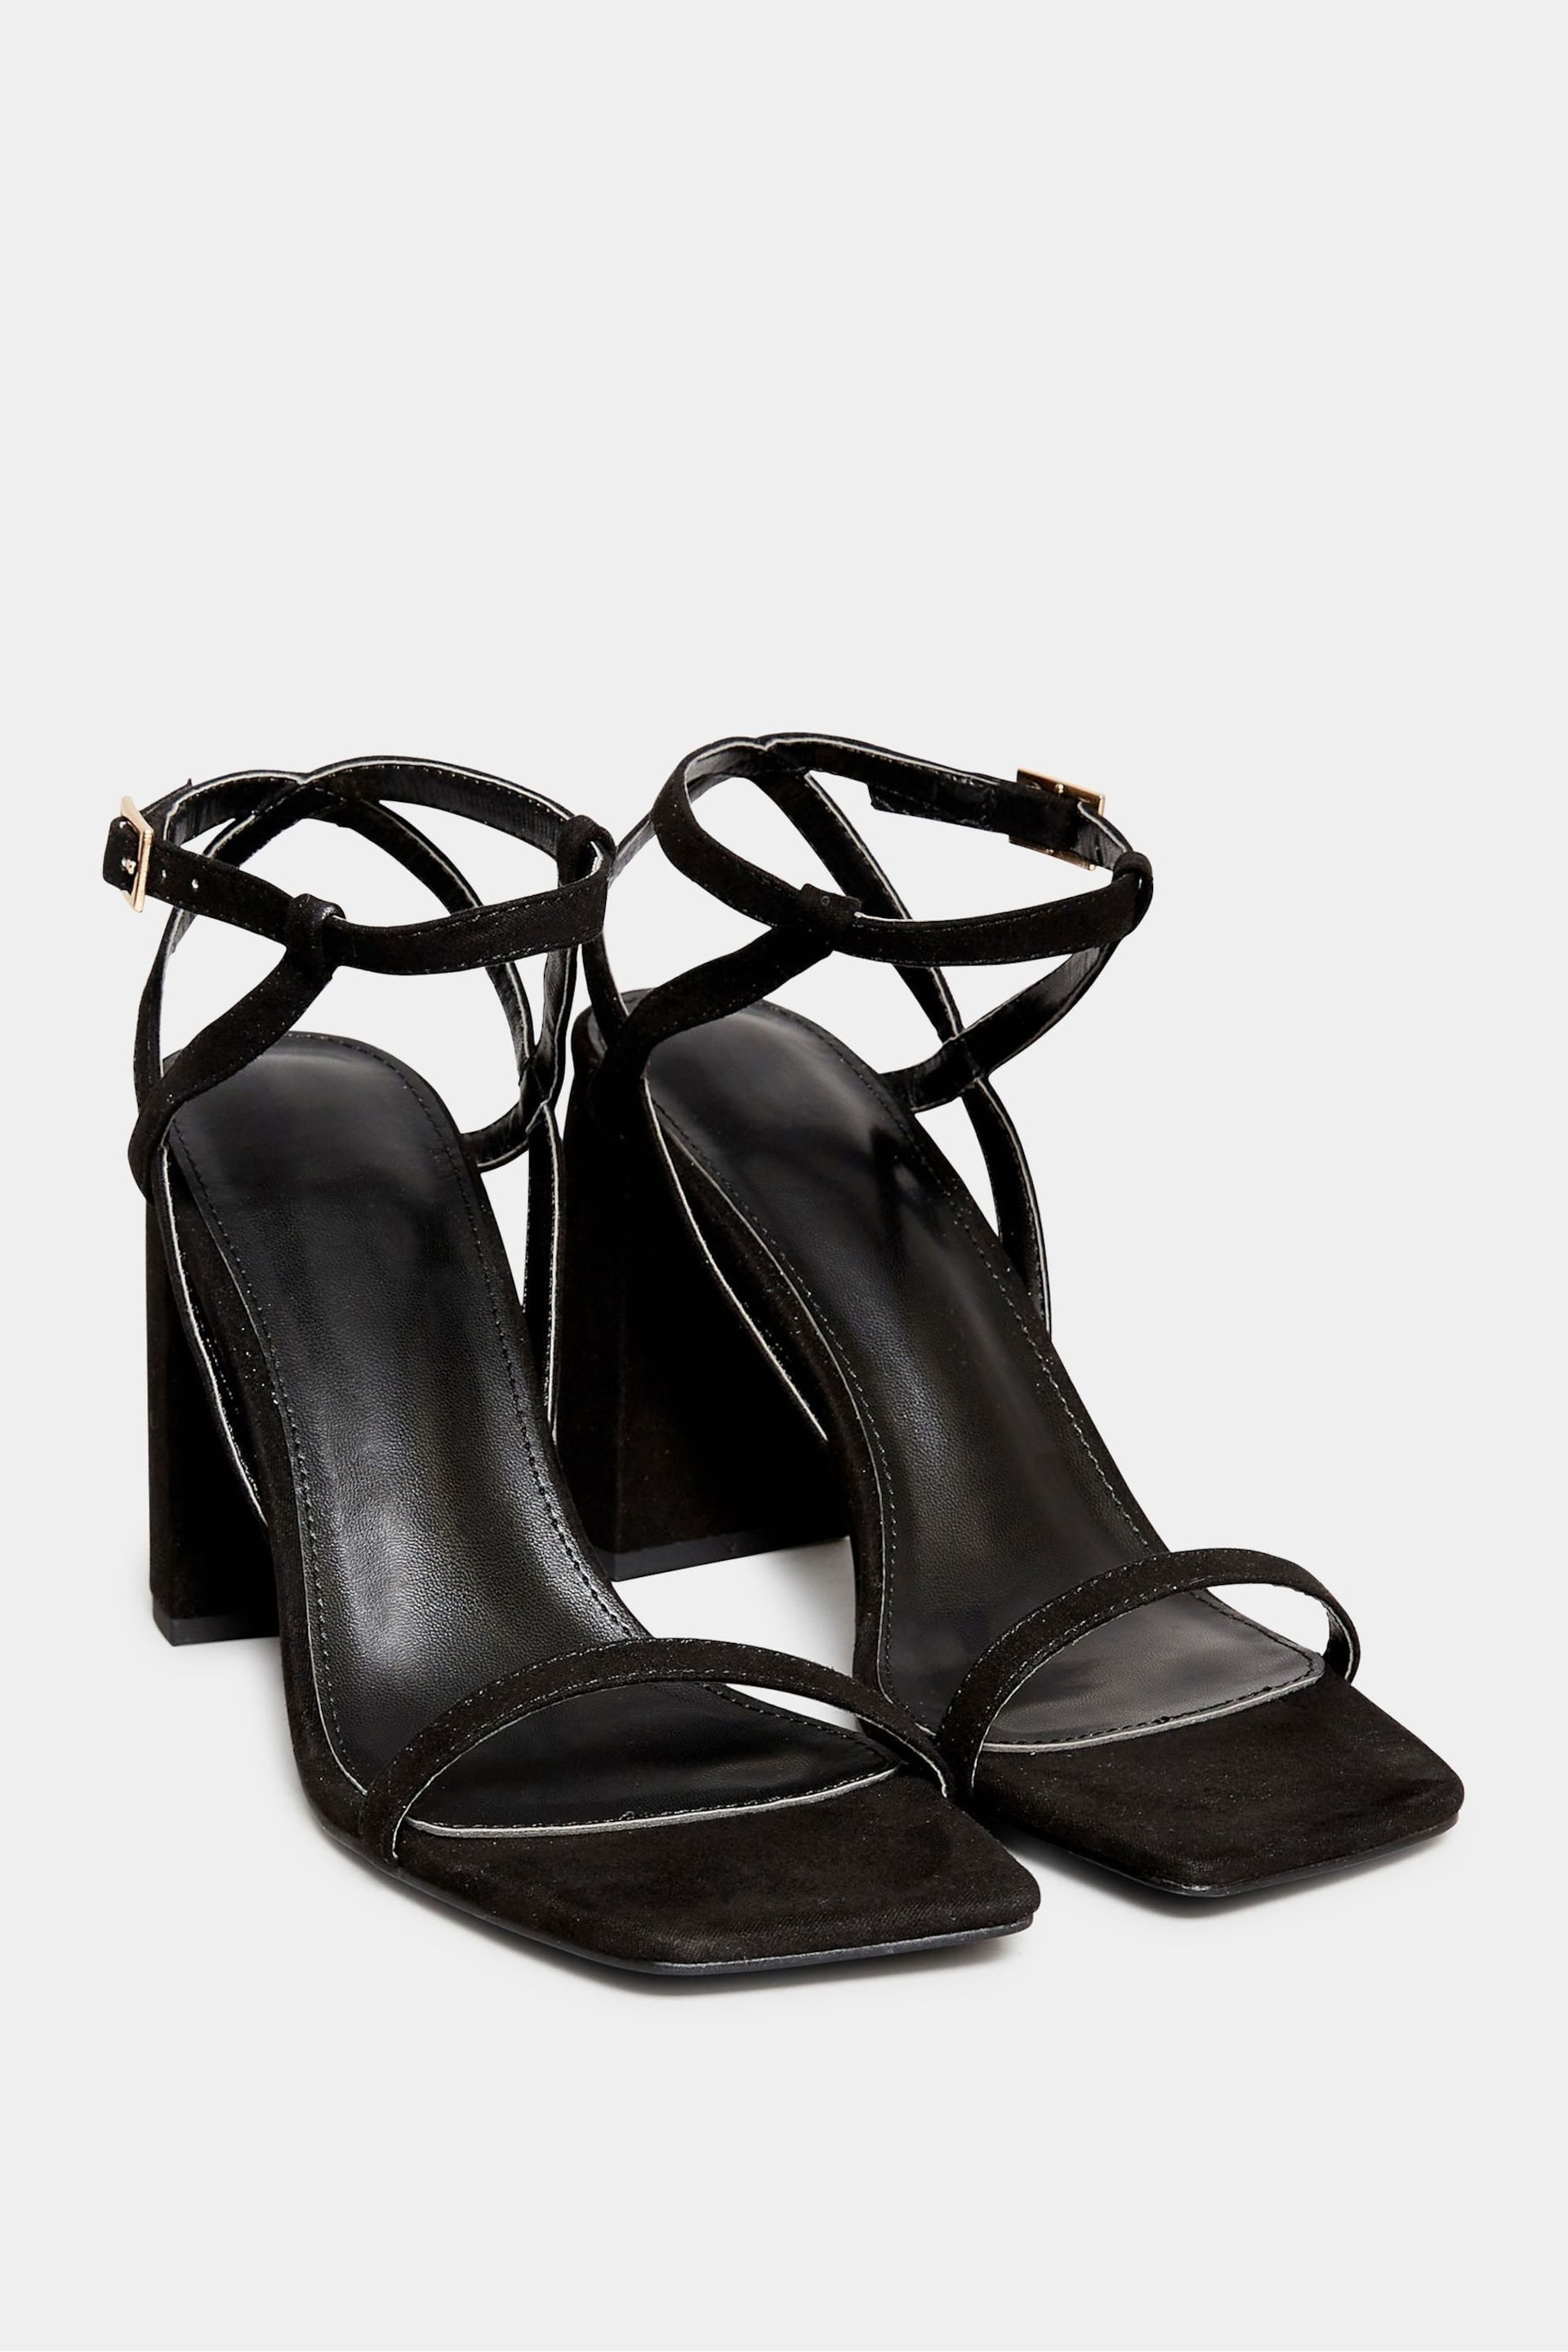 Long Tall Sally Black Faux Suede Block Heels - Image 1 of 6